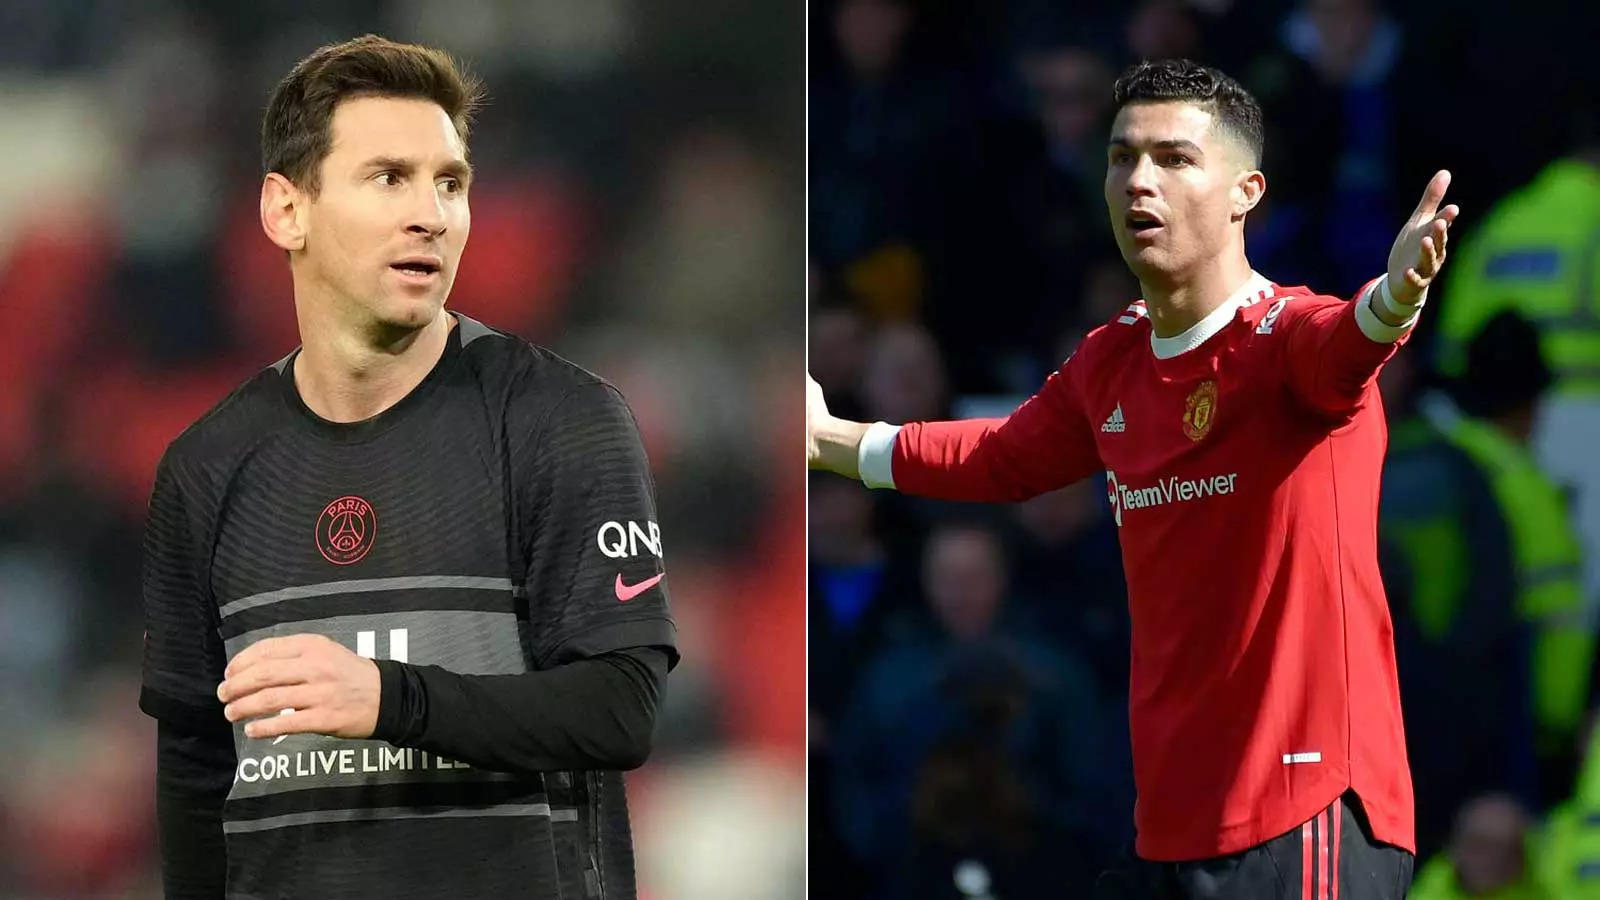 Lionel Messi threatened to leave PSG if club signed Cristiano Ronaldo from  Manchester United: Report